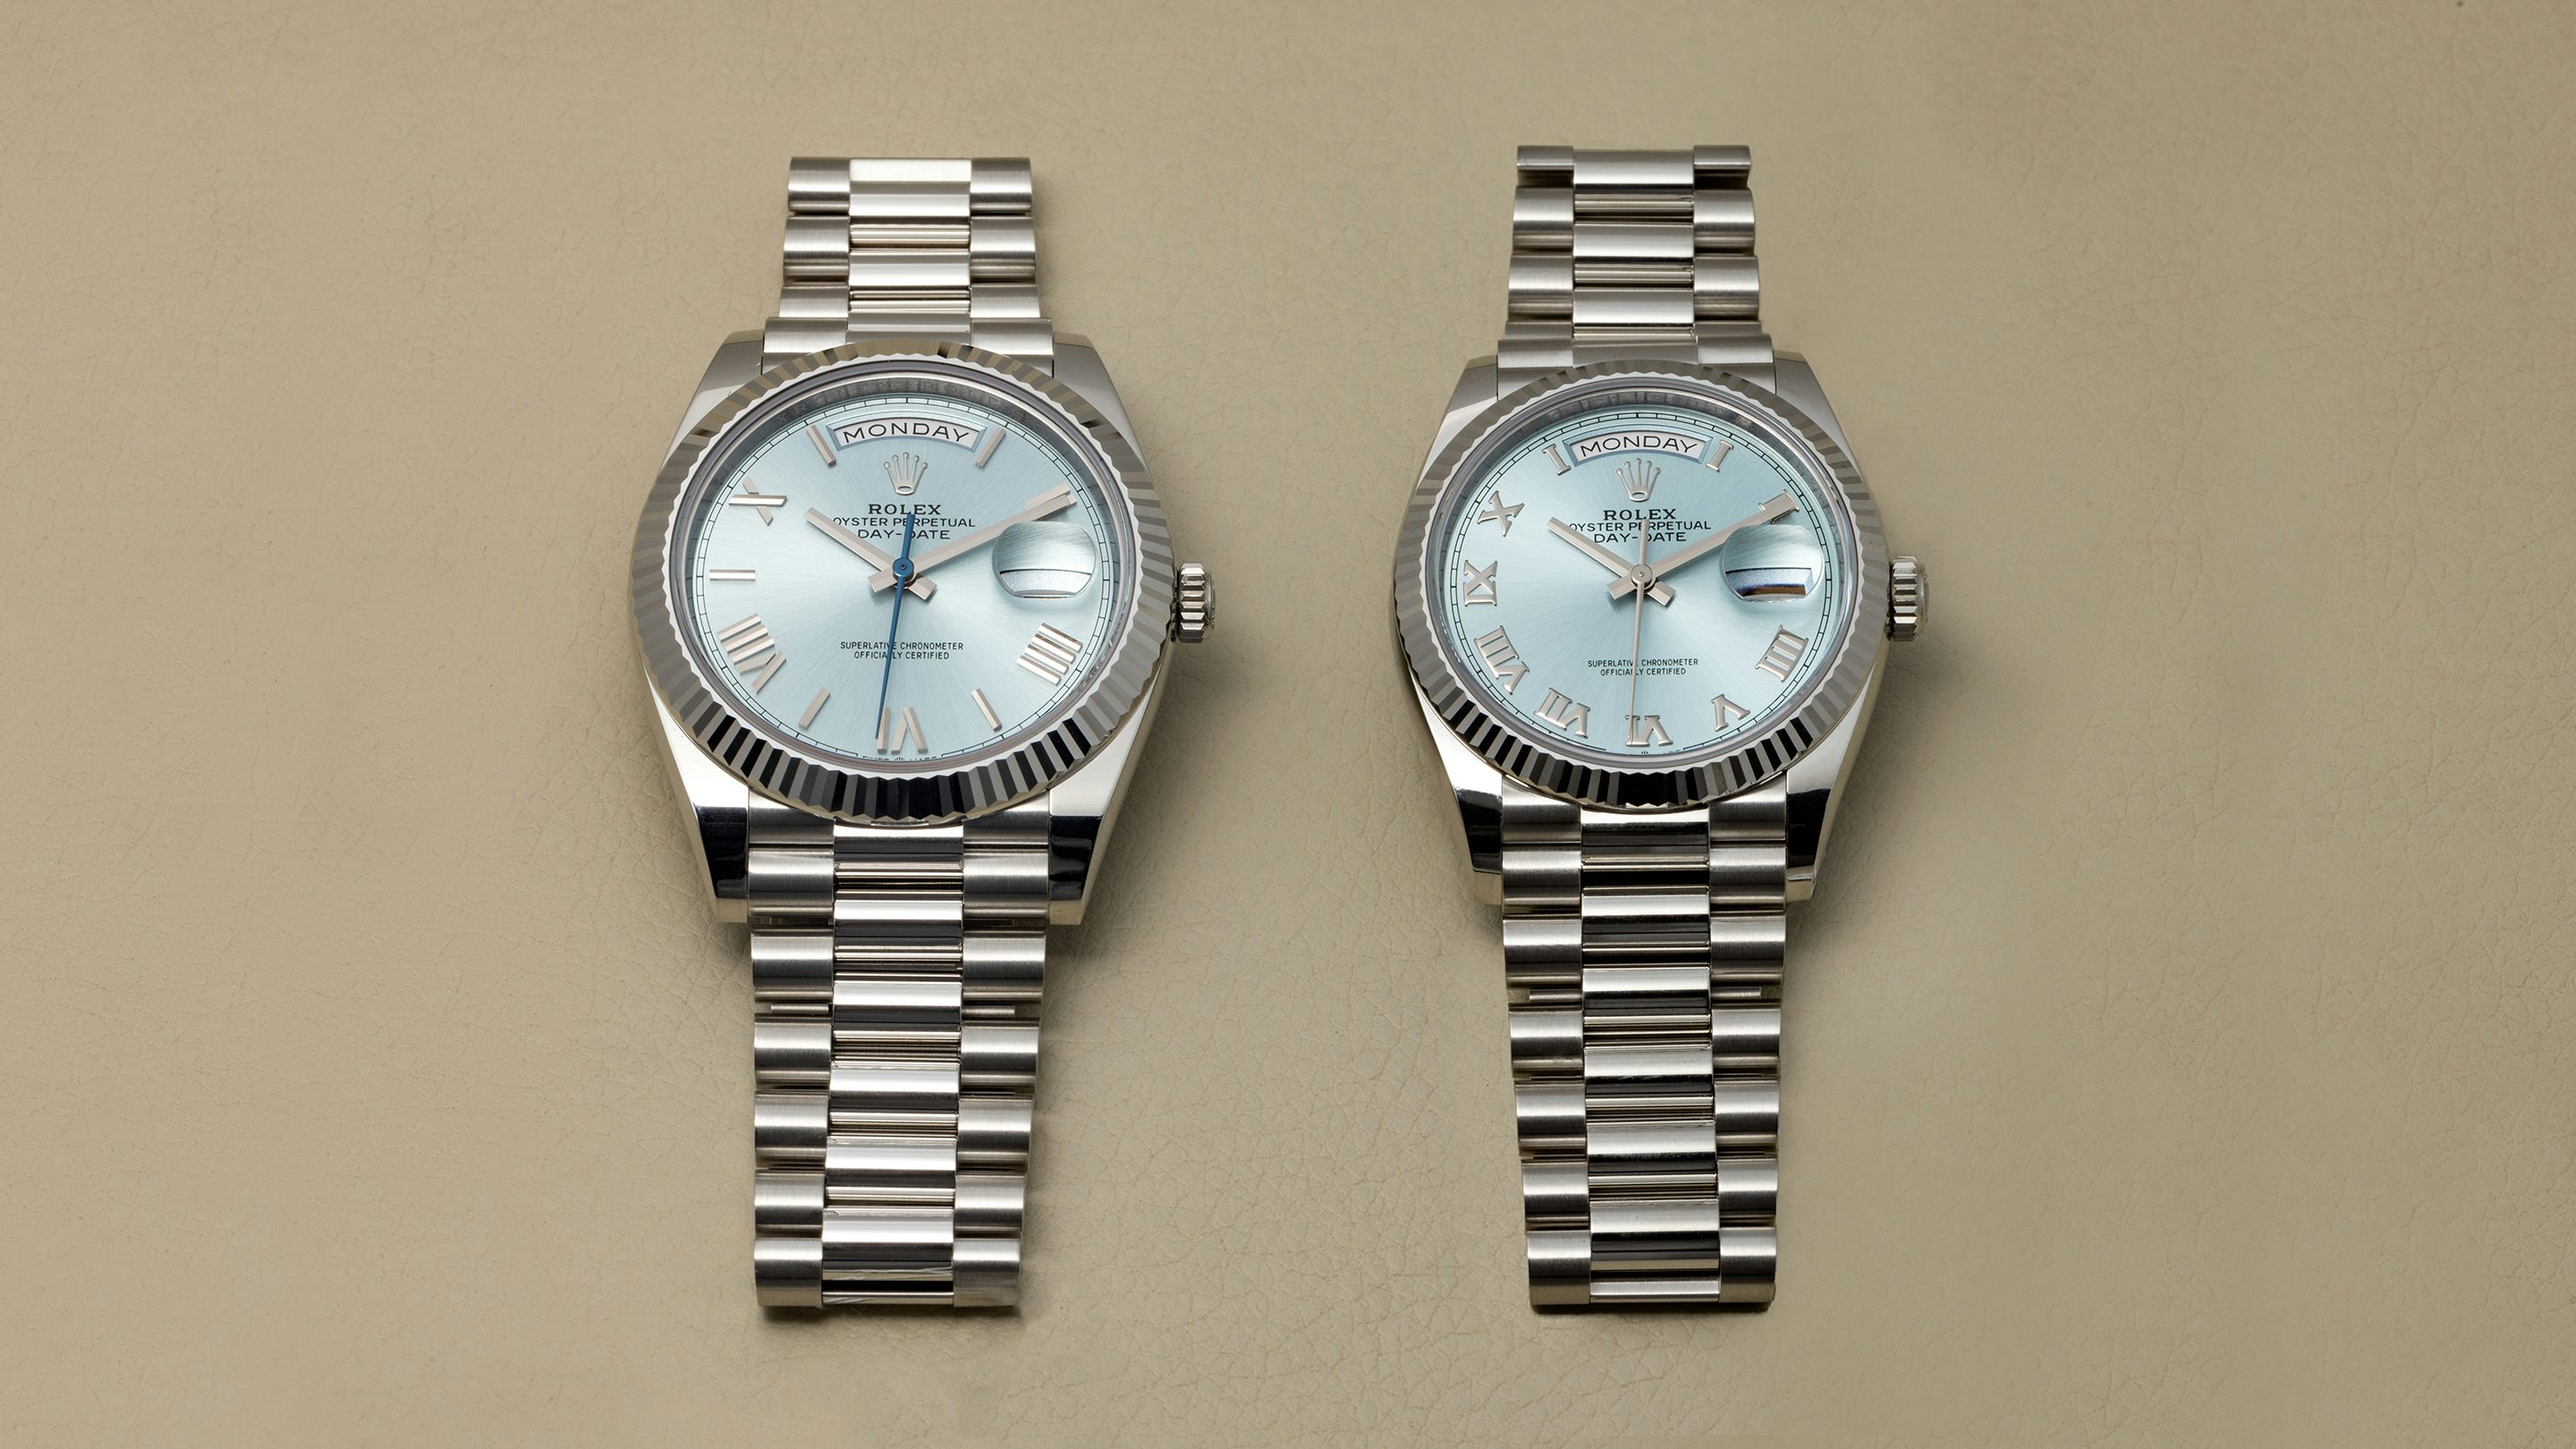 Rolex Day Date Ice Blue Watches - Luxury Watches USA